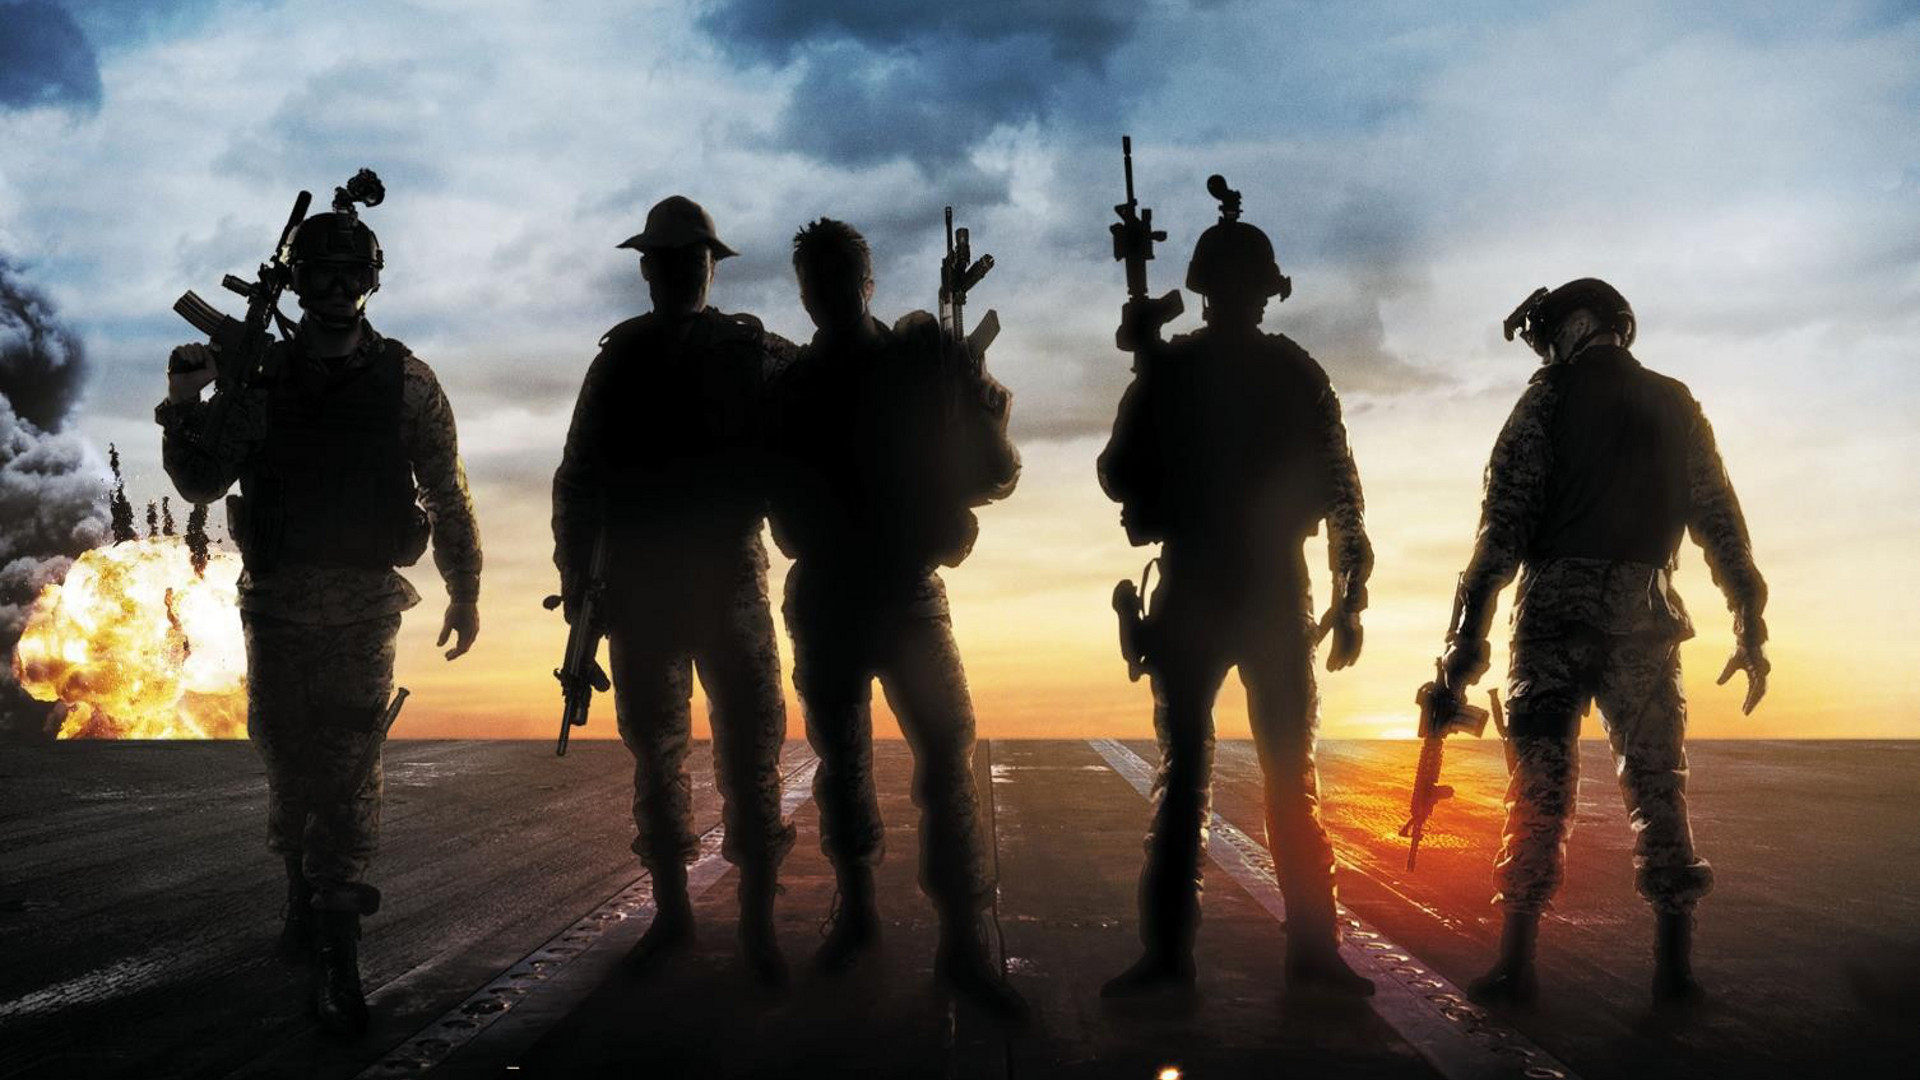 1920x1080 Act Of Valor HD Wallpaper | Background Image |  | ID:609406 -  Wallpaper Abyss